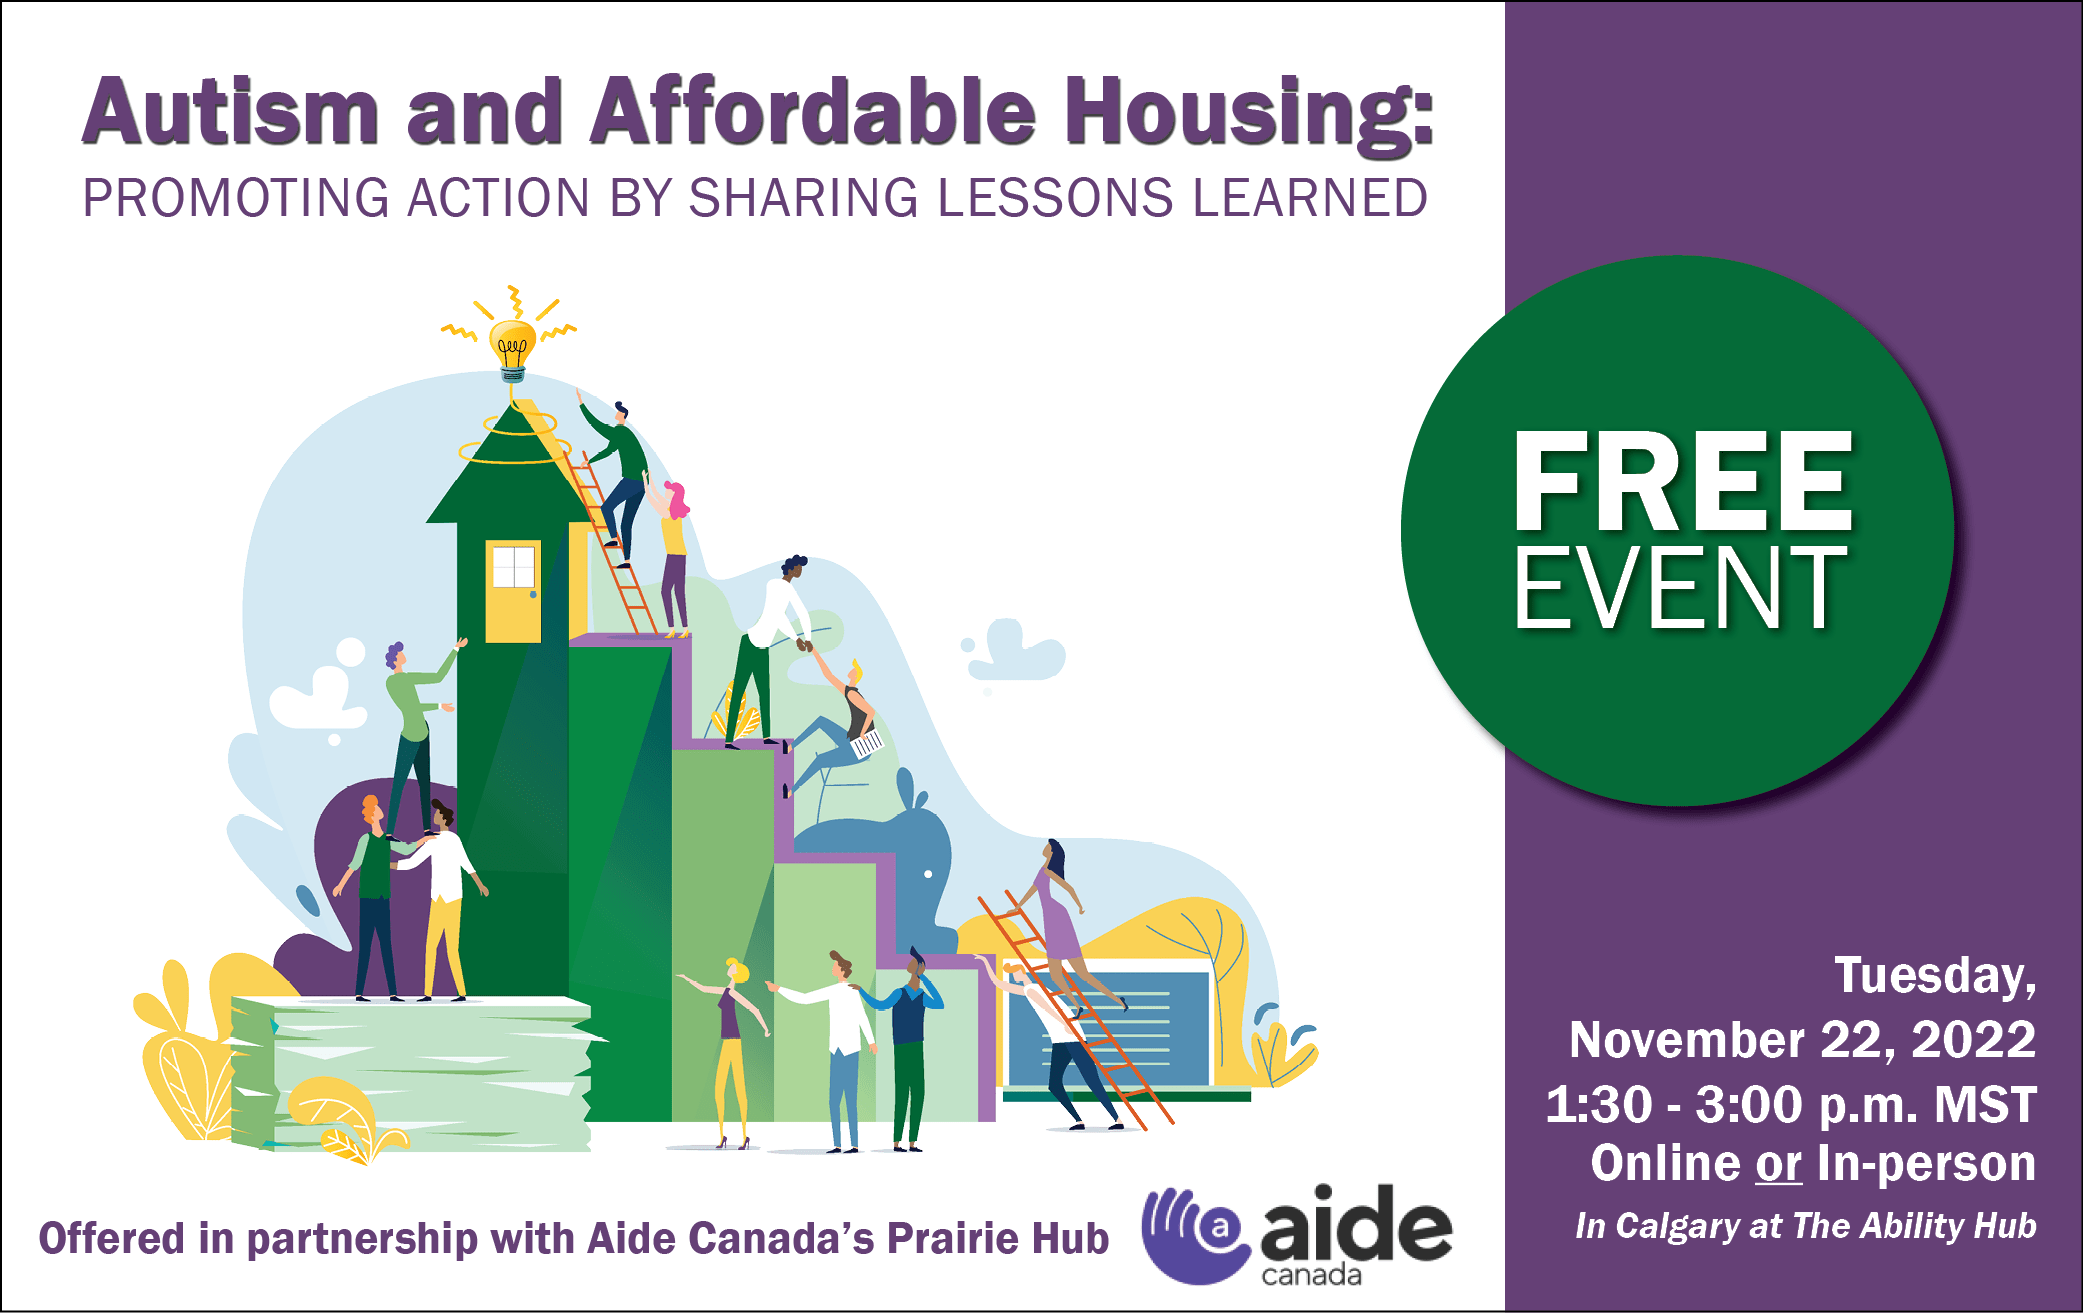 Autism and Affordable Housing, AIDE Canada, Webinar